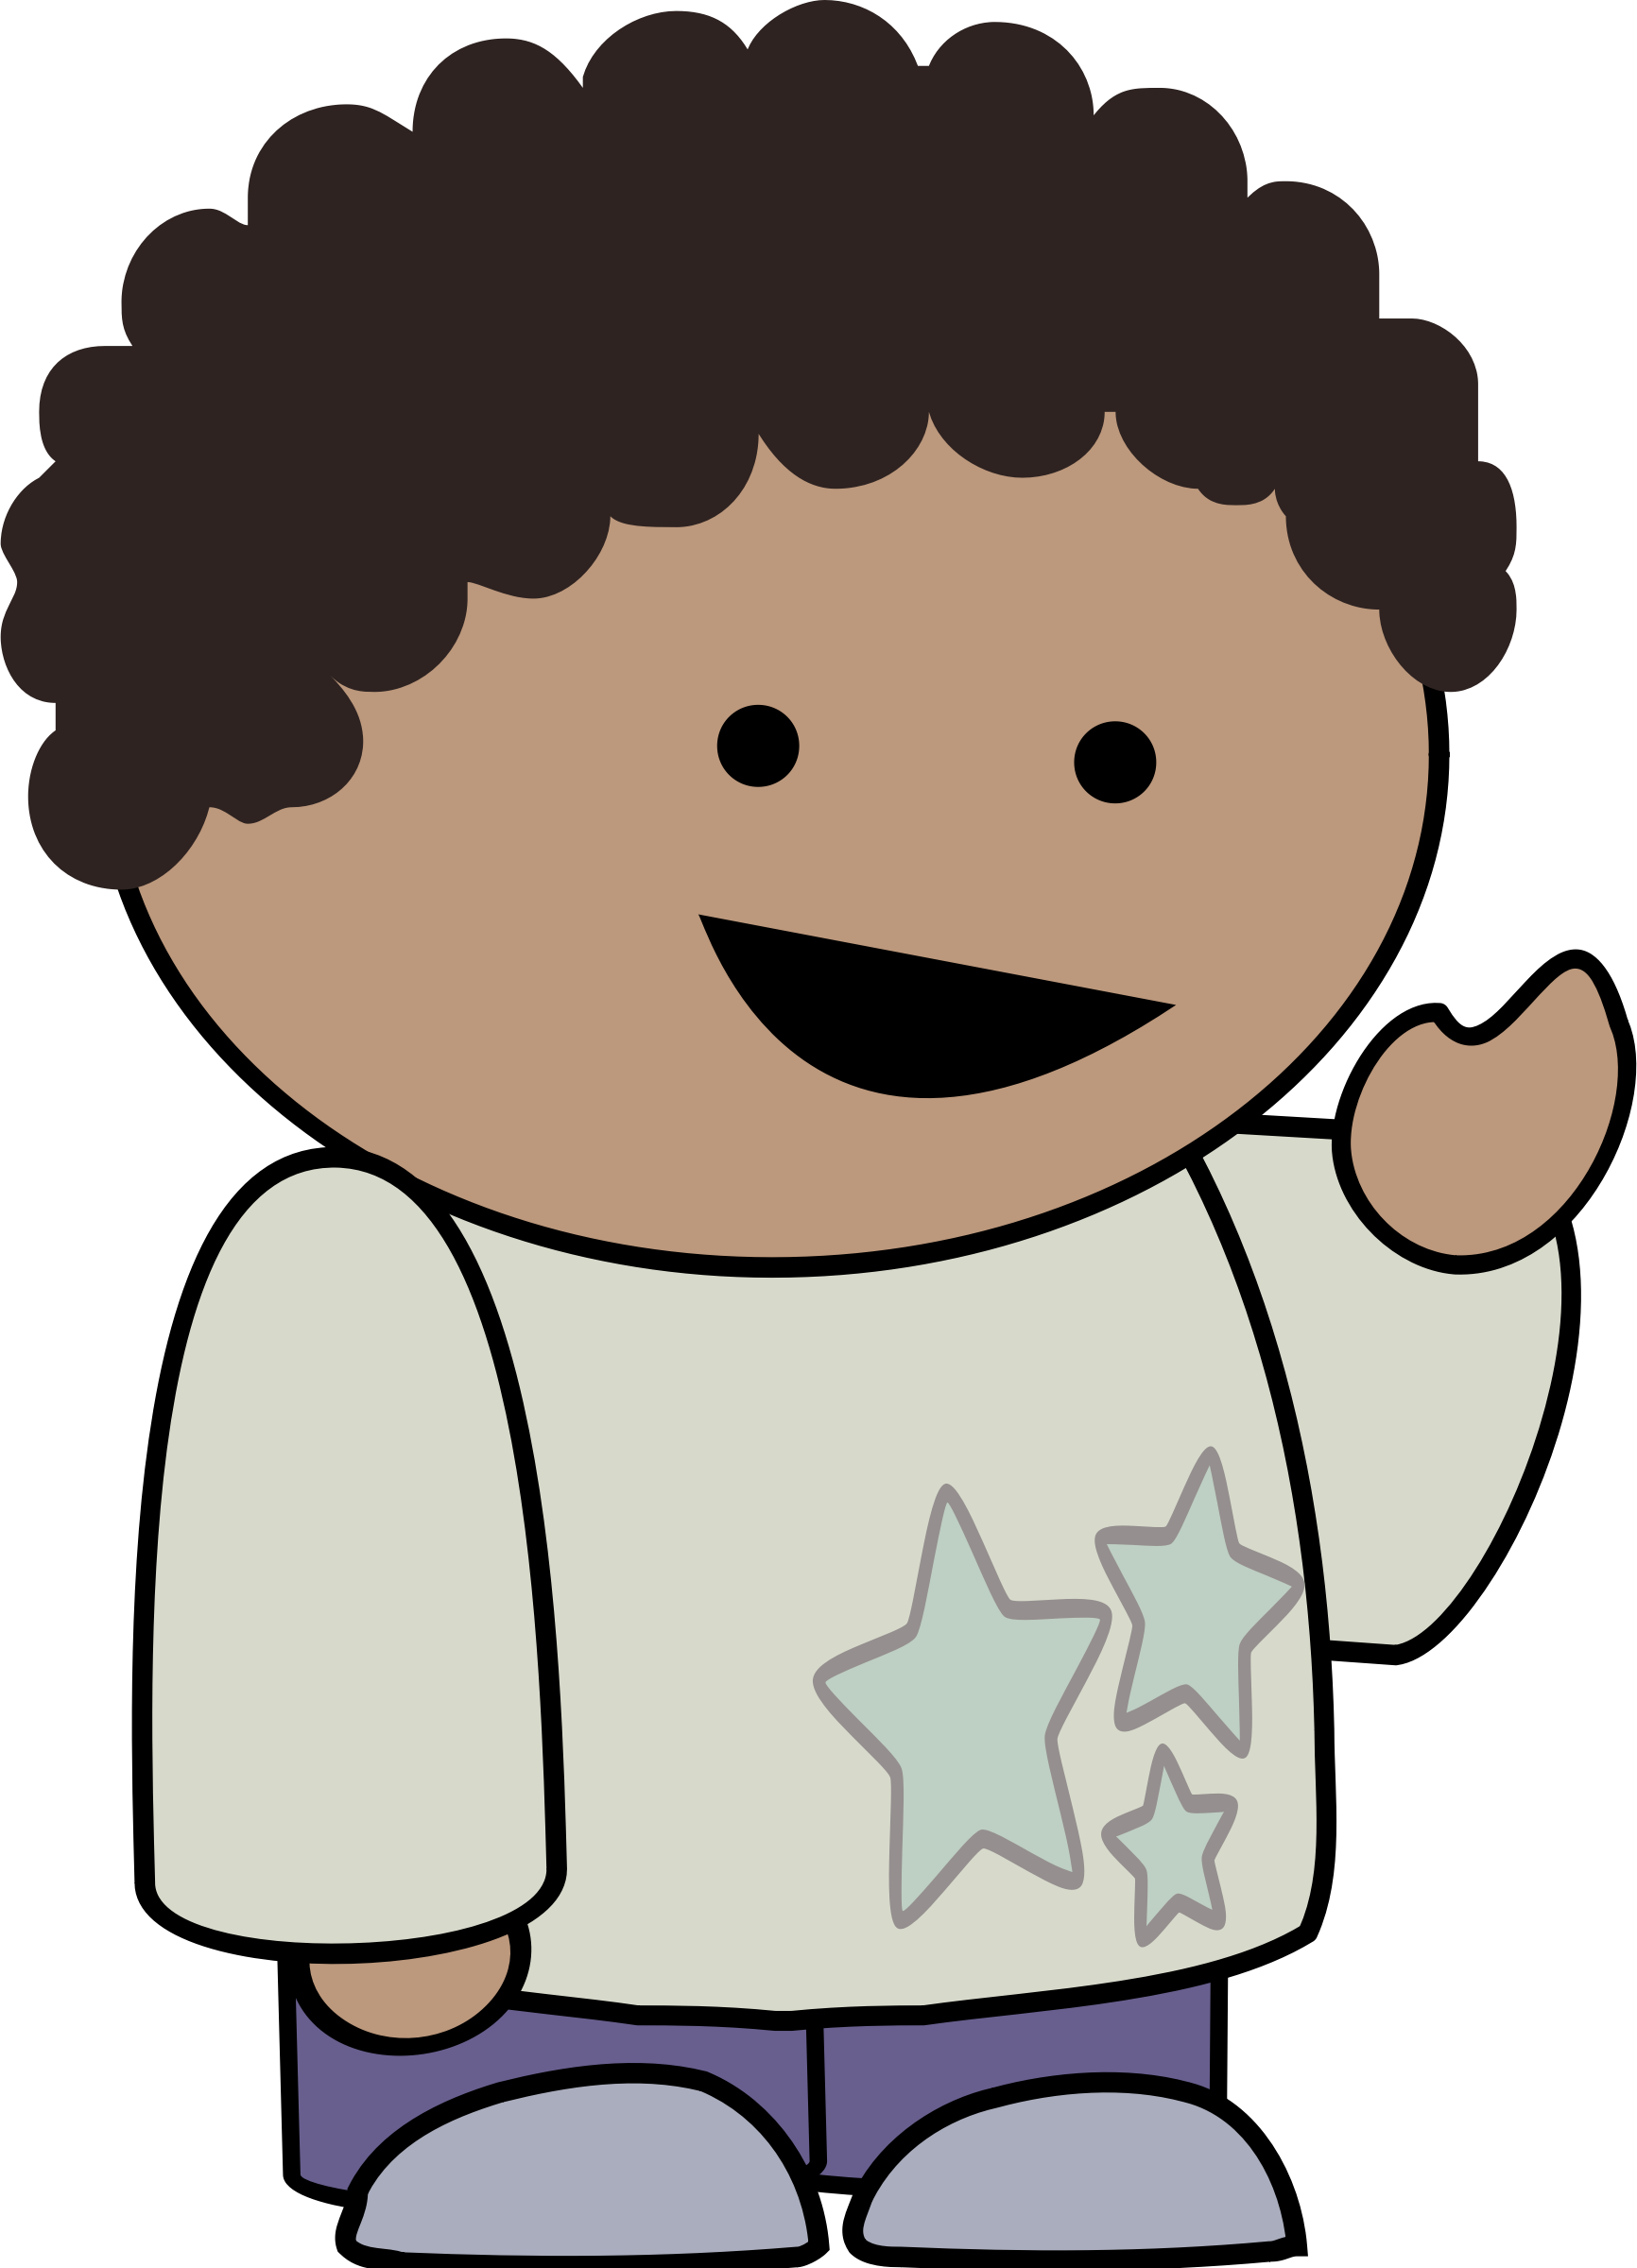 pointing clipart boy